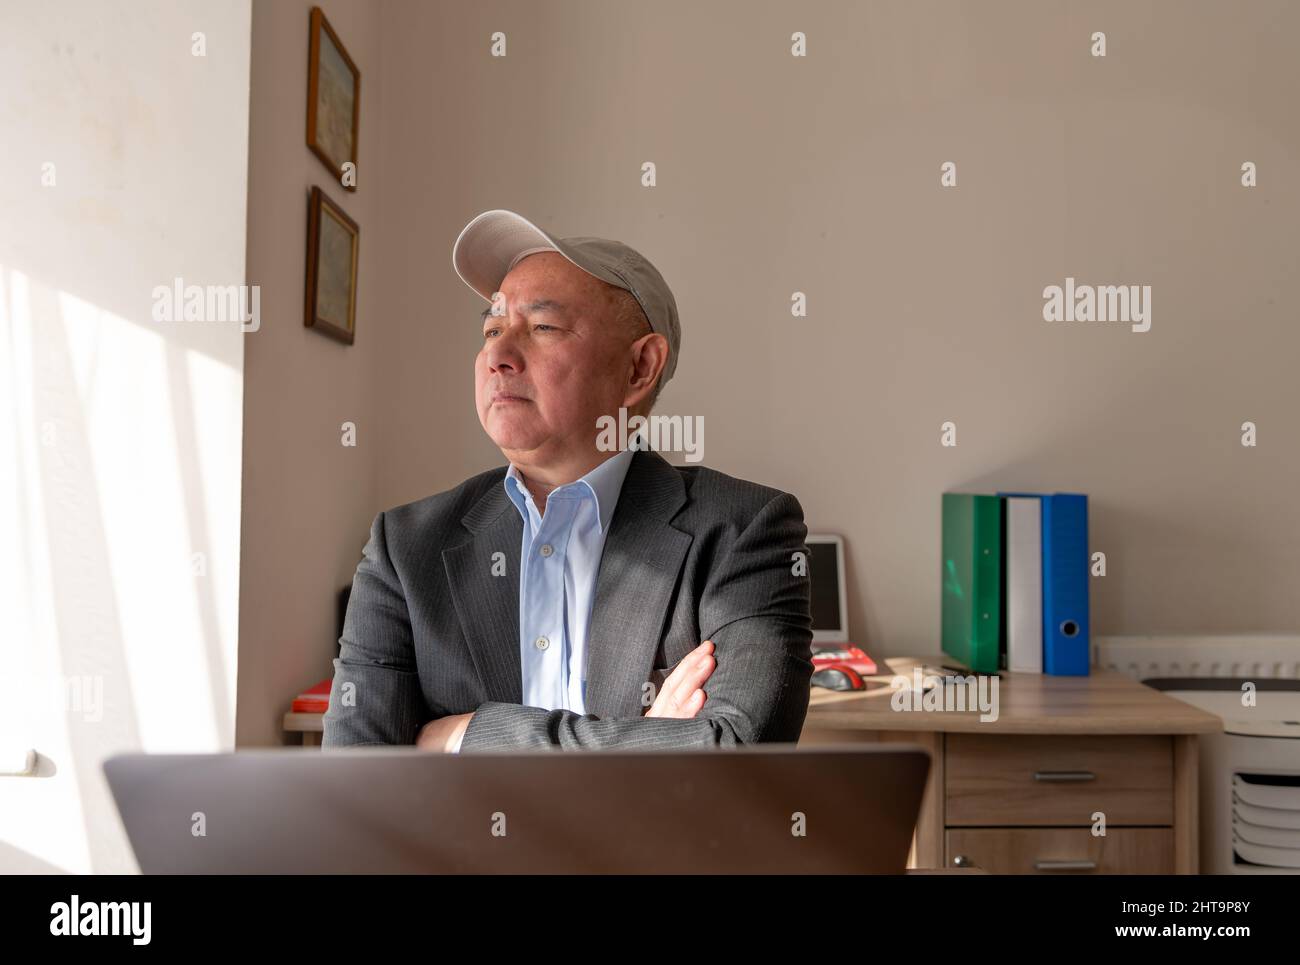 A business man in his office with crossed arms and a proud expression. Stock Photo